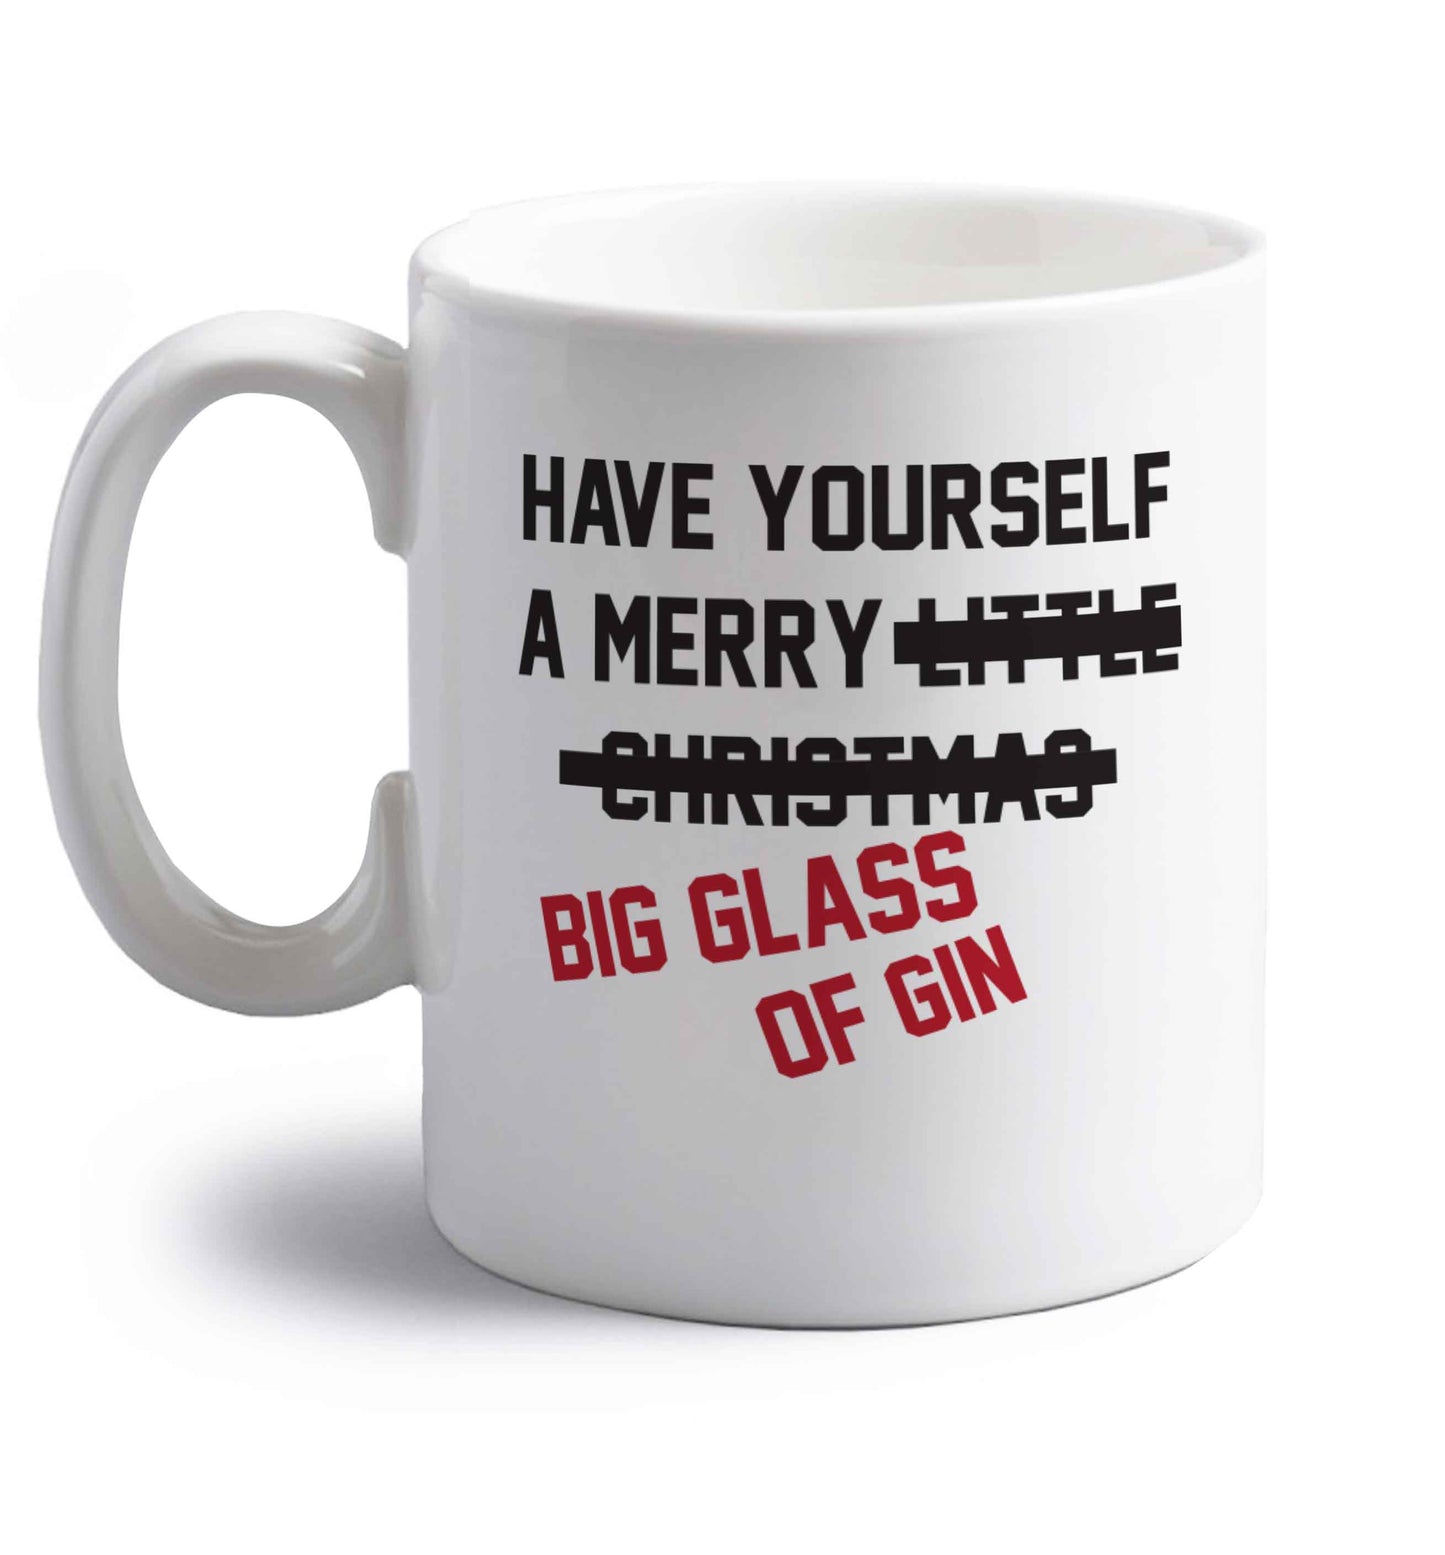 Have yourself a merry big glass of gin right handed white ceramic mug 